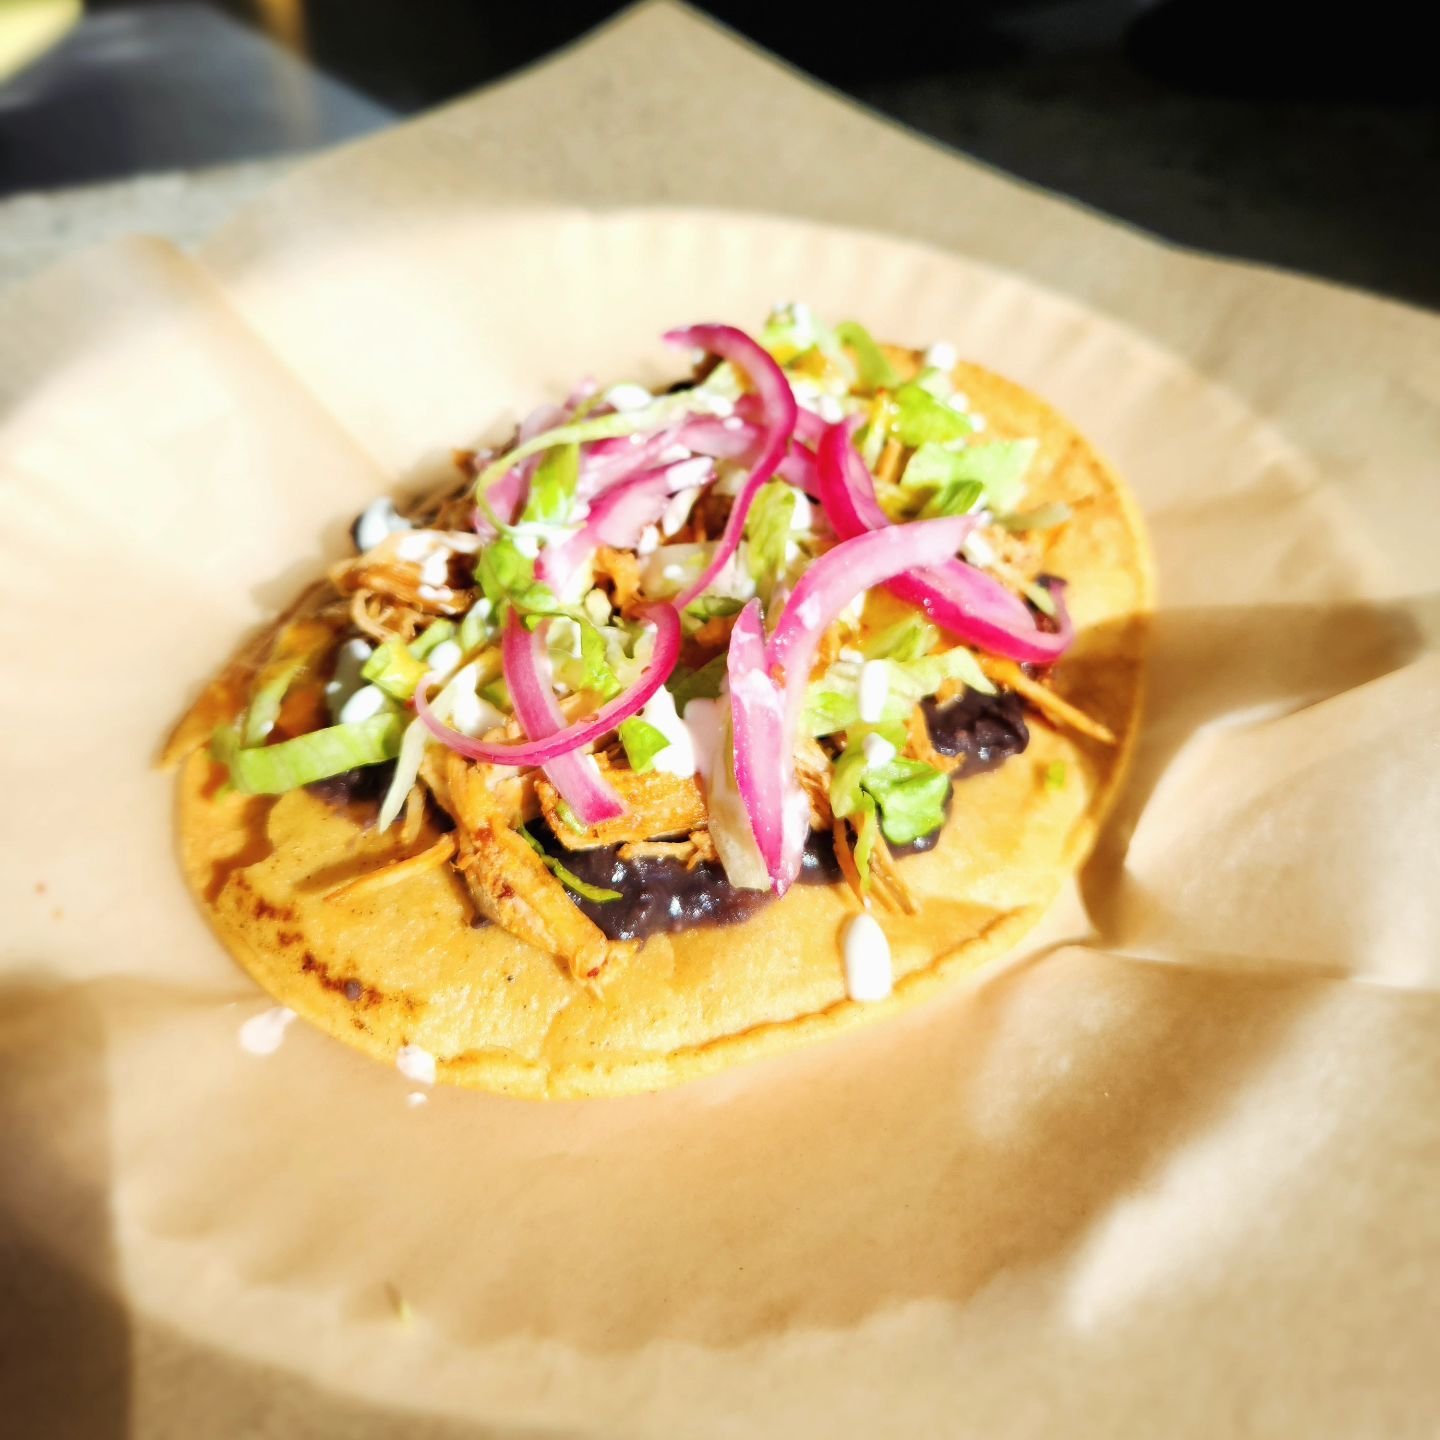 Tostada special this weekend! Chipotle pork🔥 Limited quantities so hustle on down and get 'em while we got 'em 💥